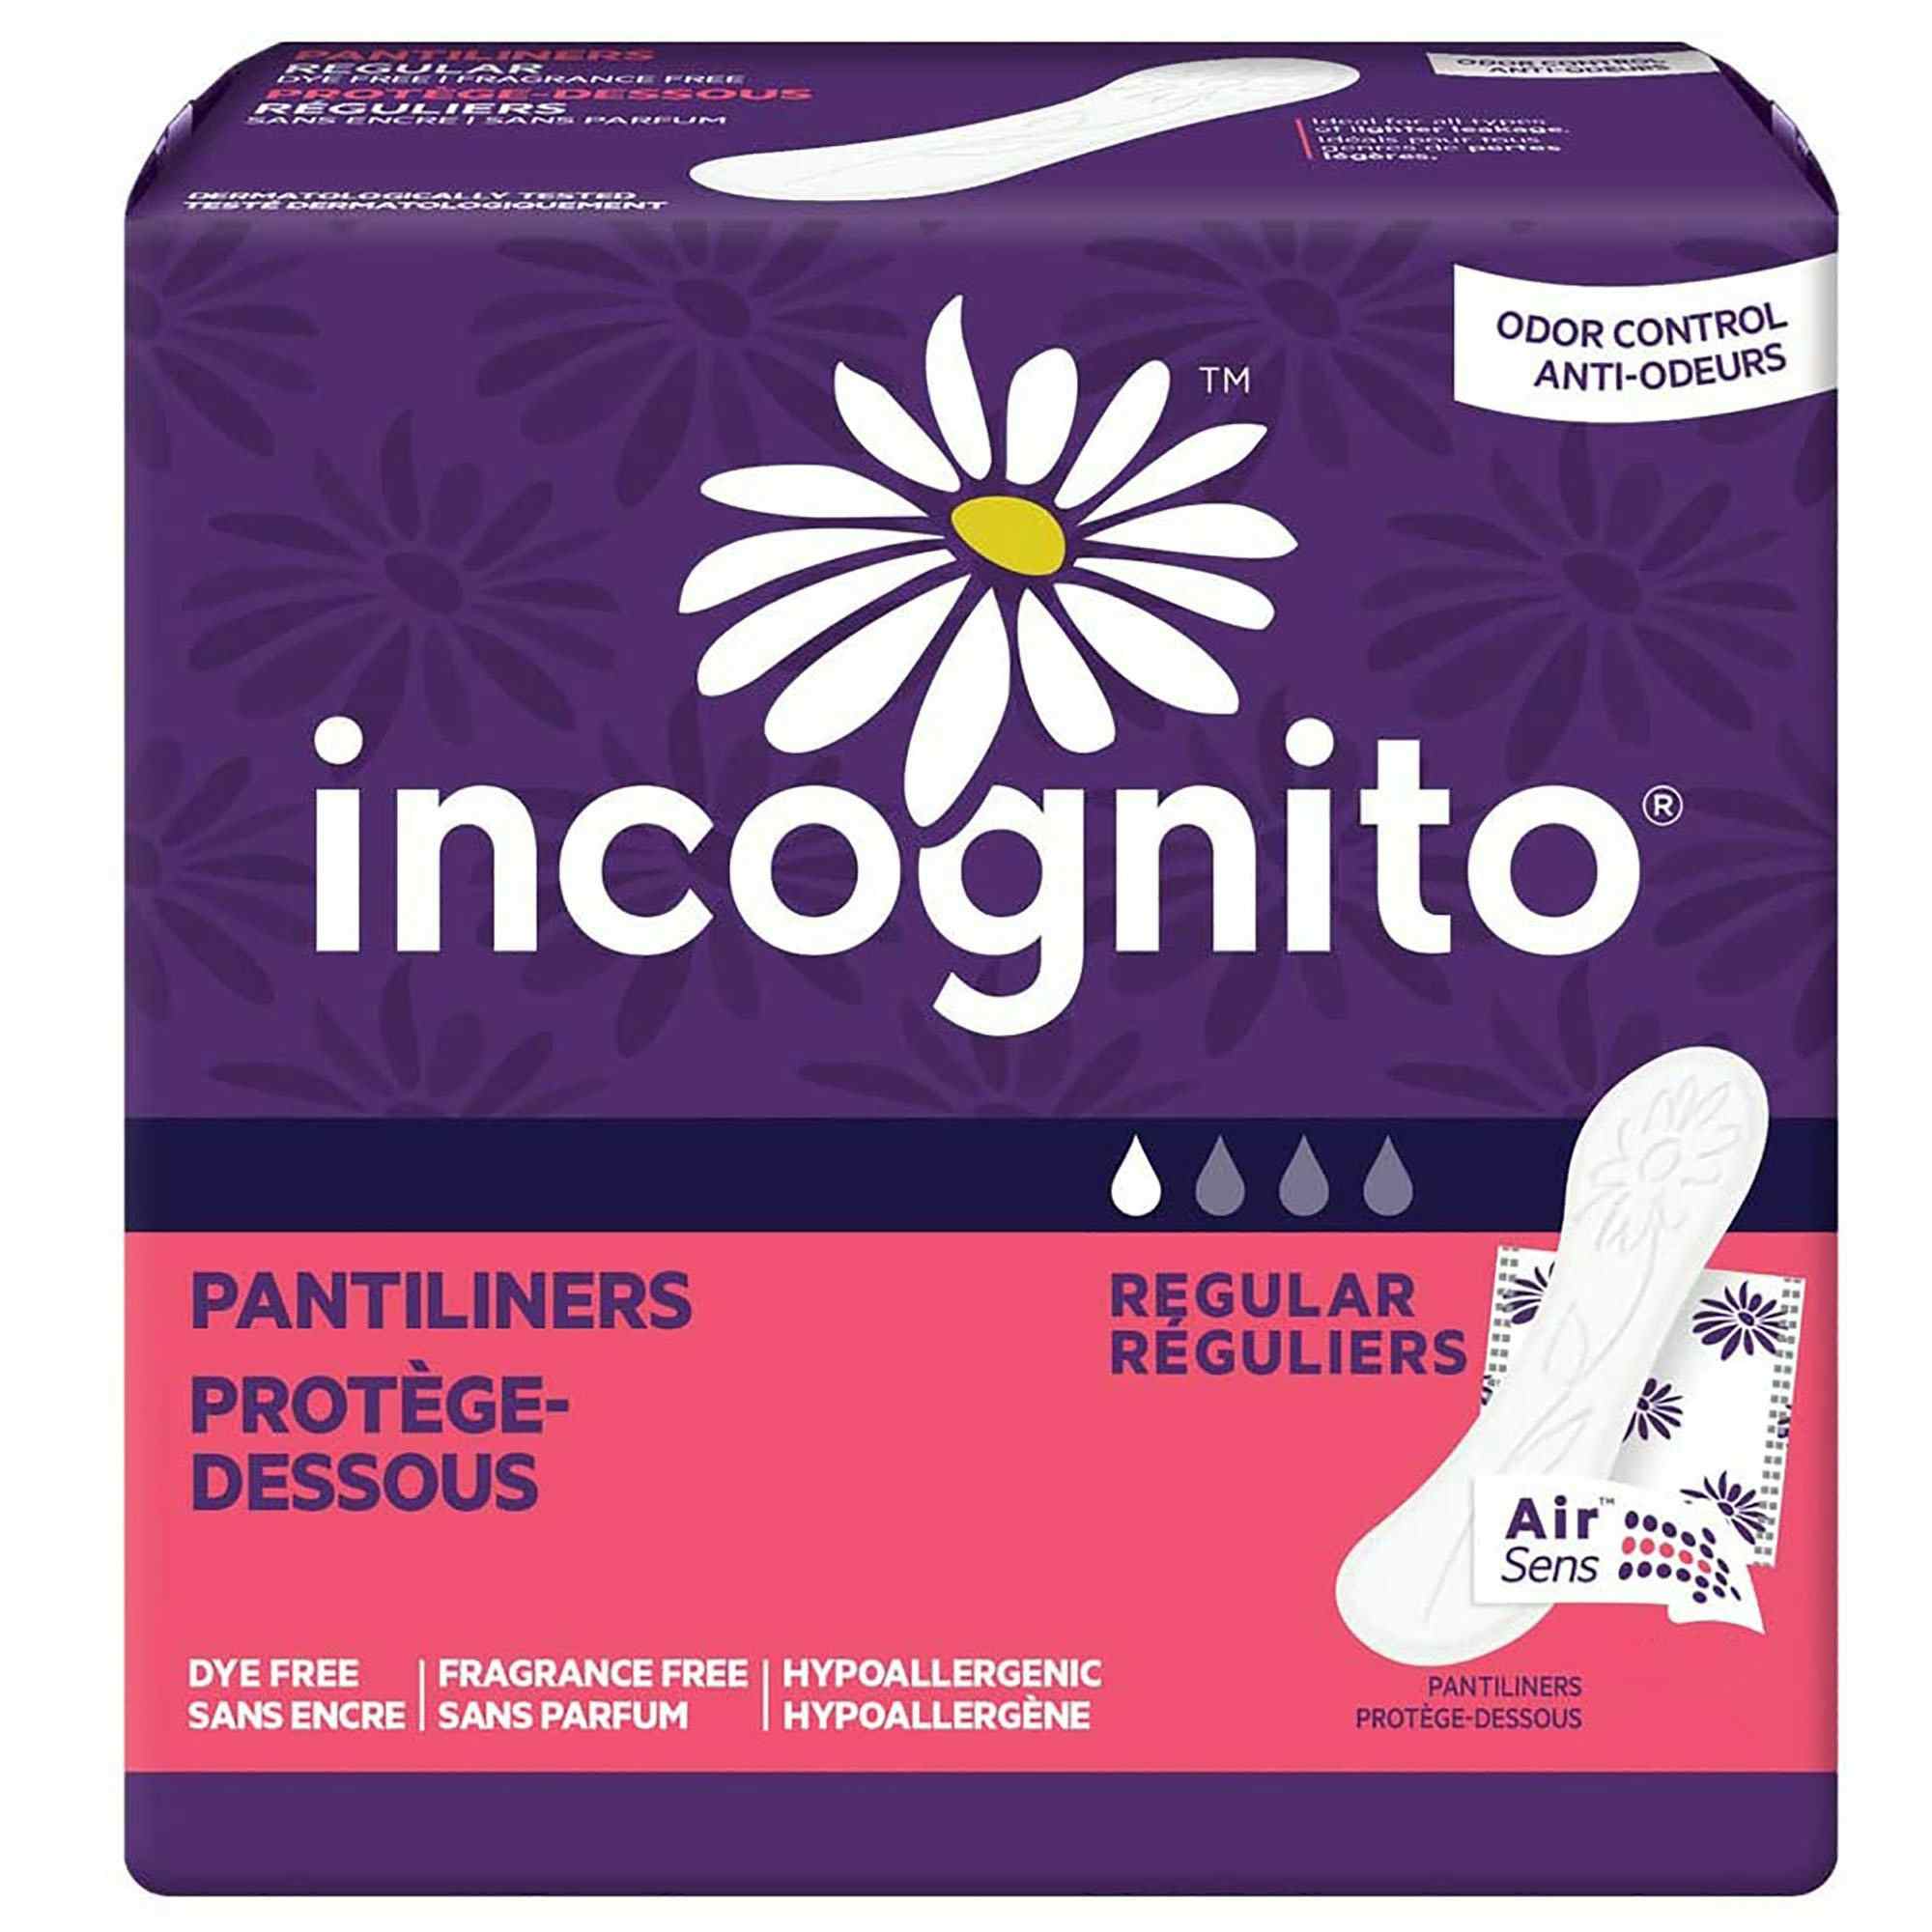 Incognito Panty Liners, Regular Absorbency, 10006613, Case of 480 (12 Bags)